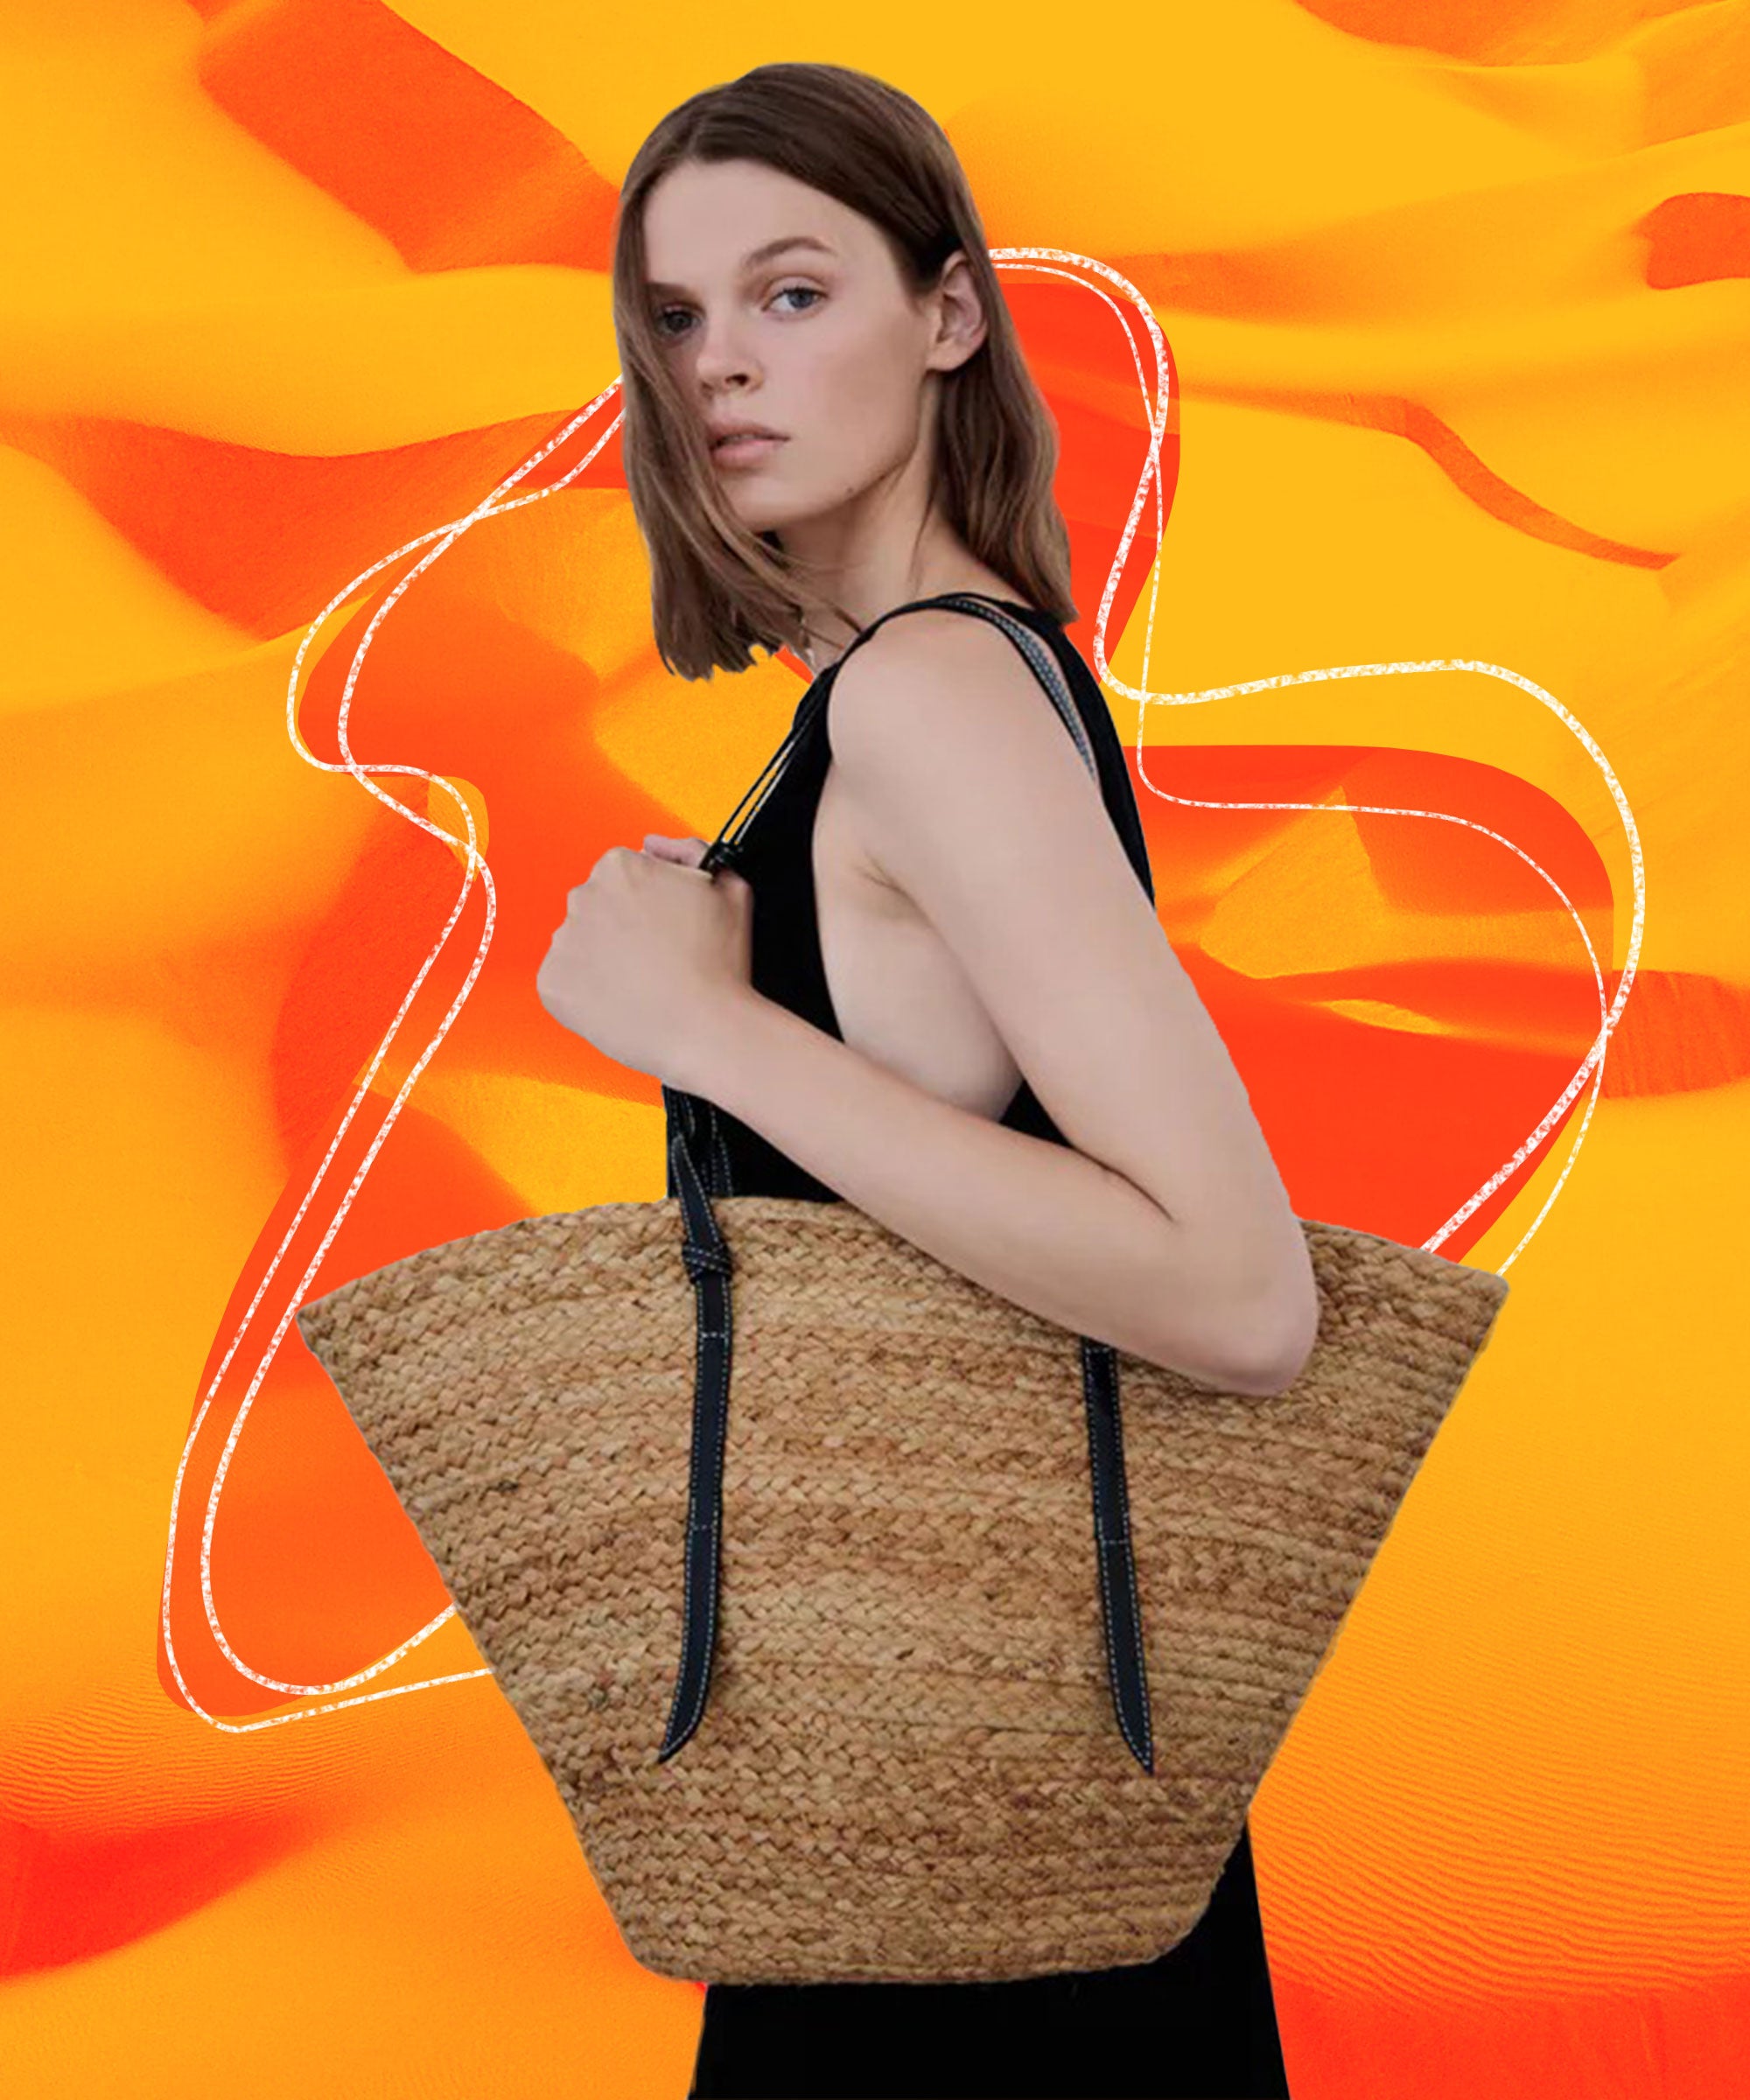 The Best Basket Bags to Shop in 2023